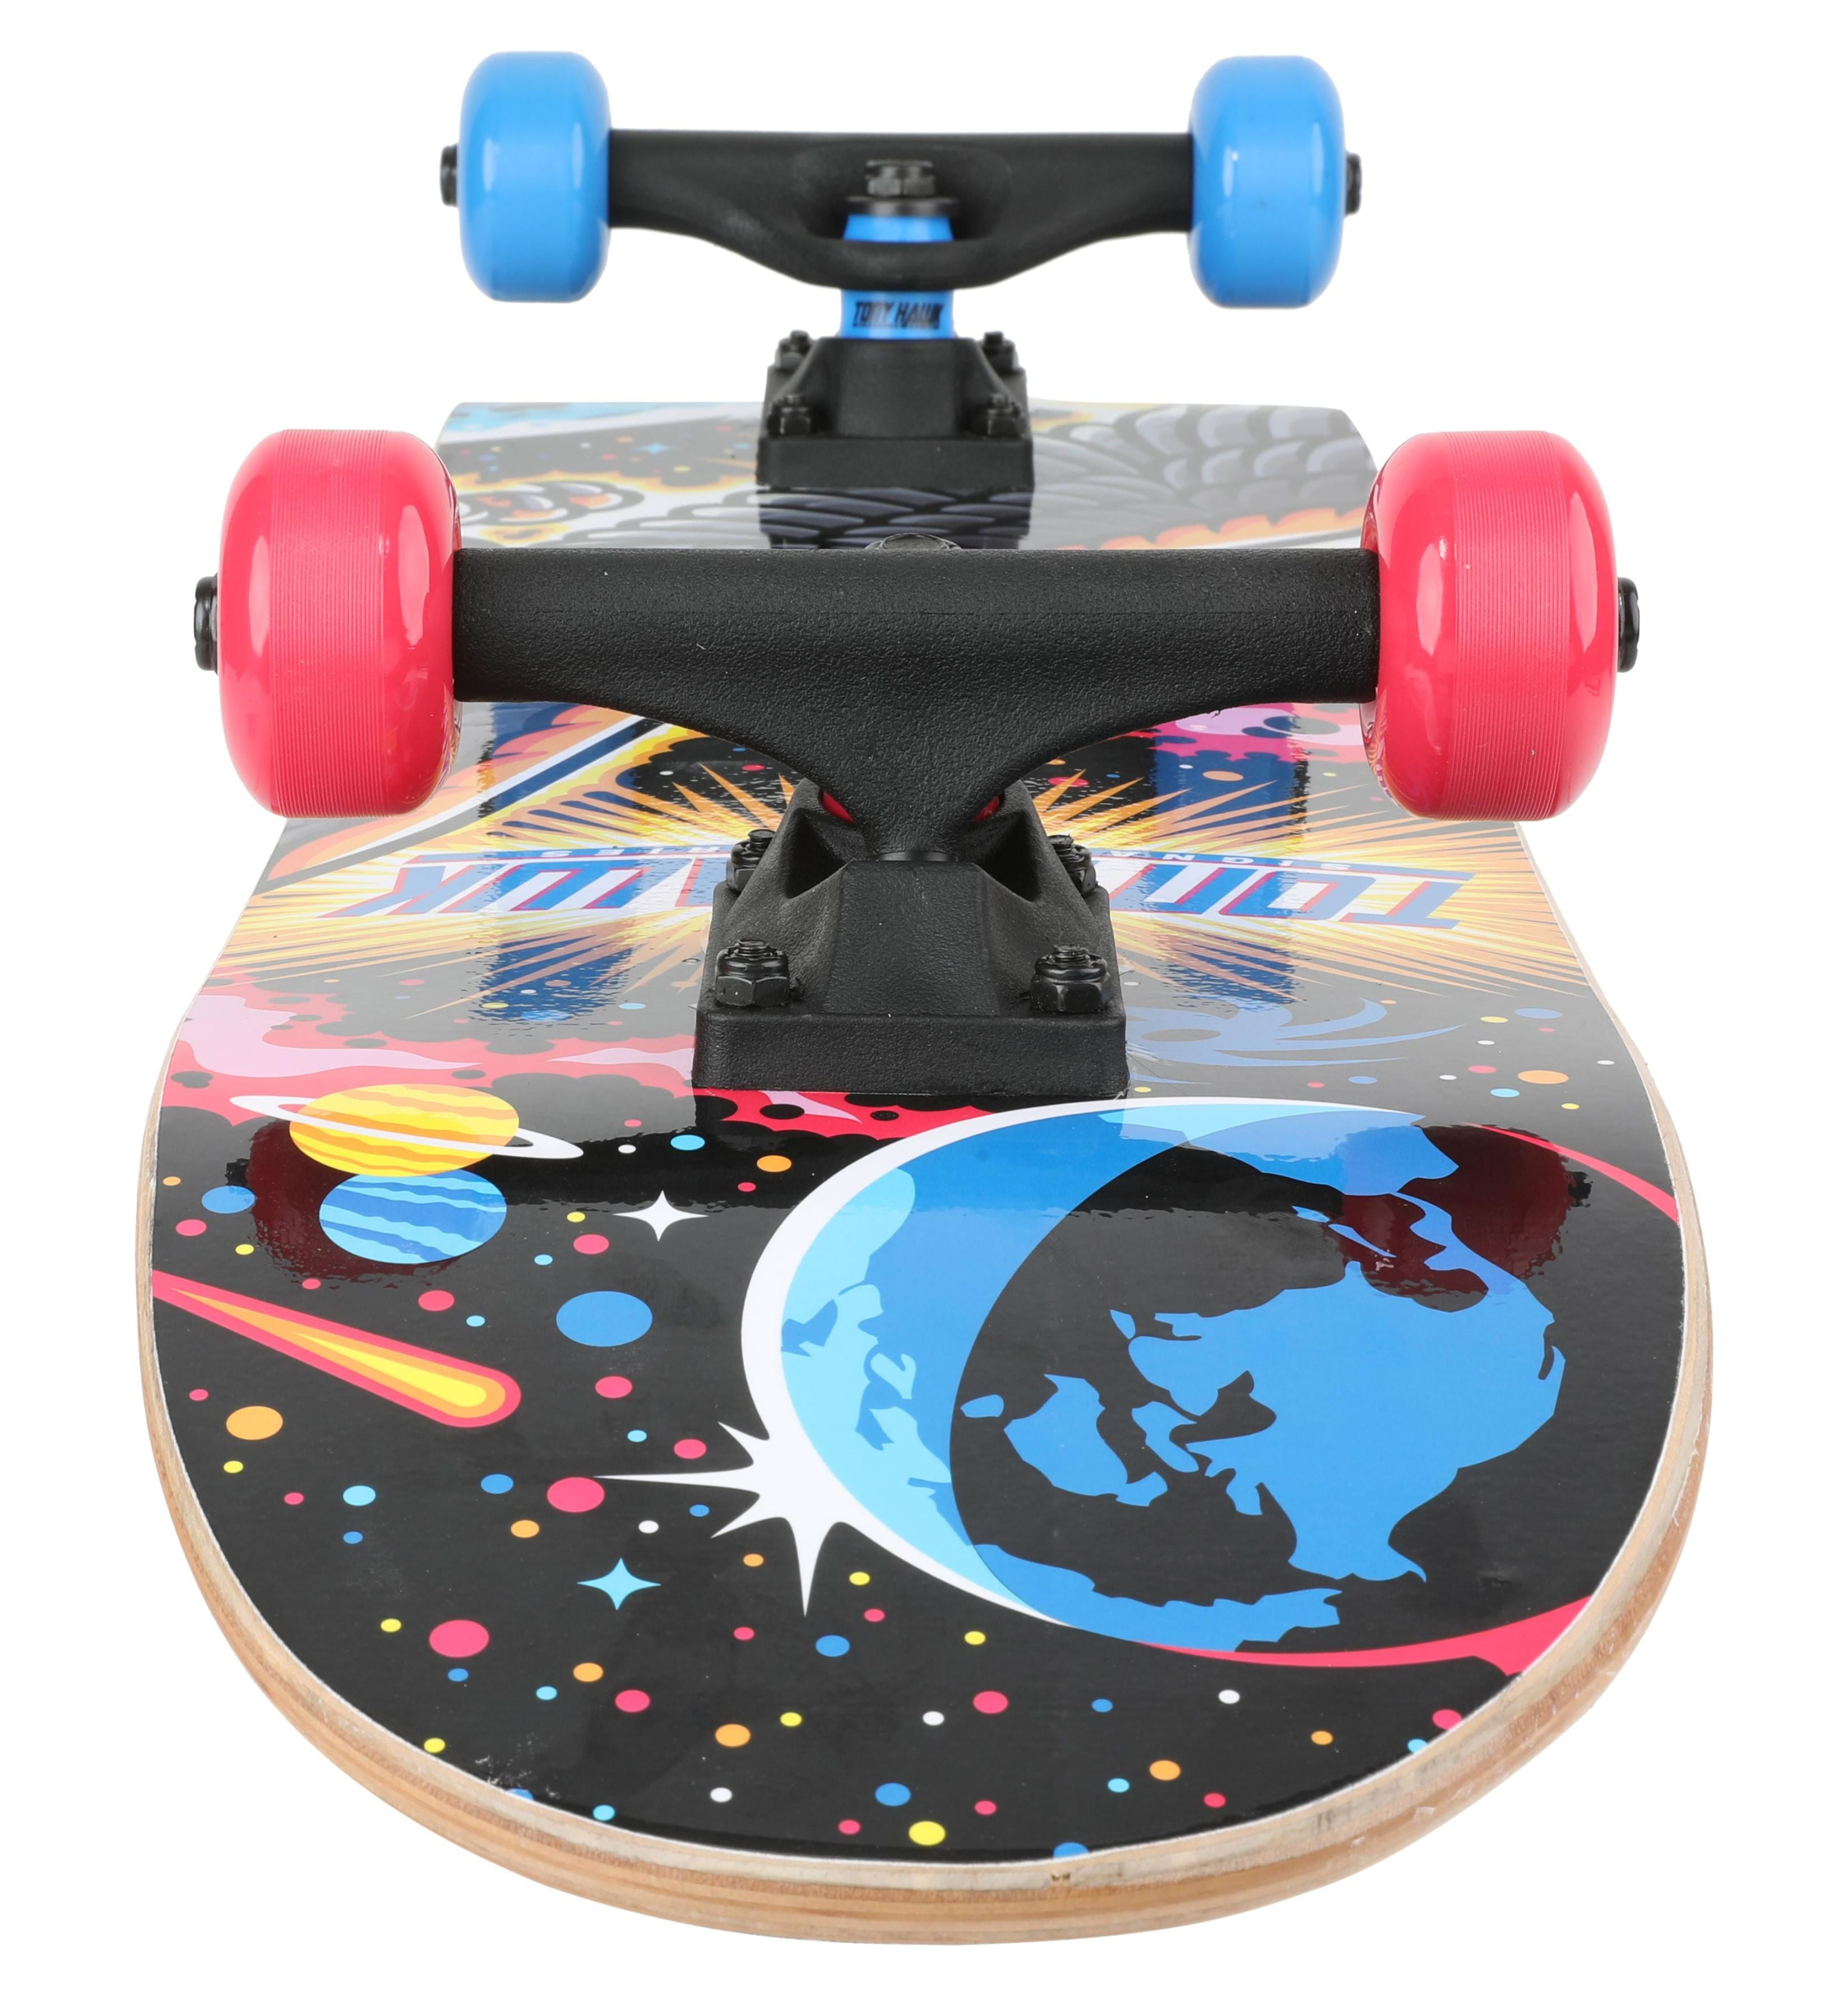 Tony Hawk 31 Popsicle Complete Skateboard with Pro Aluminum Trucks, Video  Game, Kids Ages 5 and up 